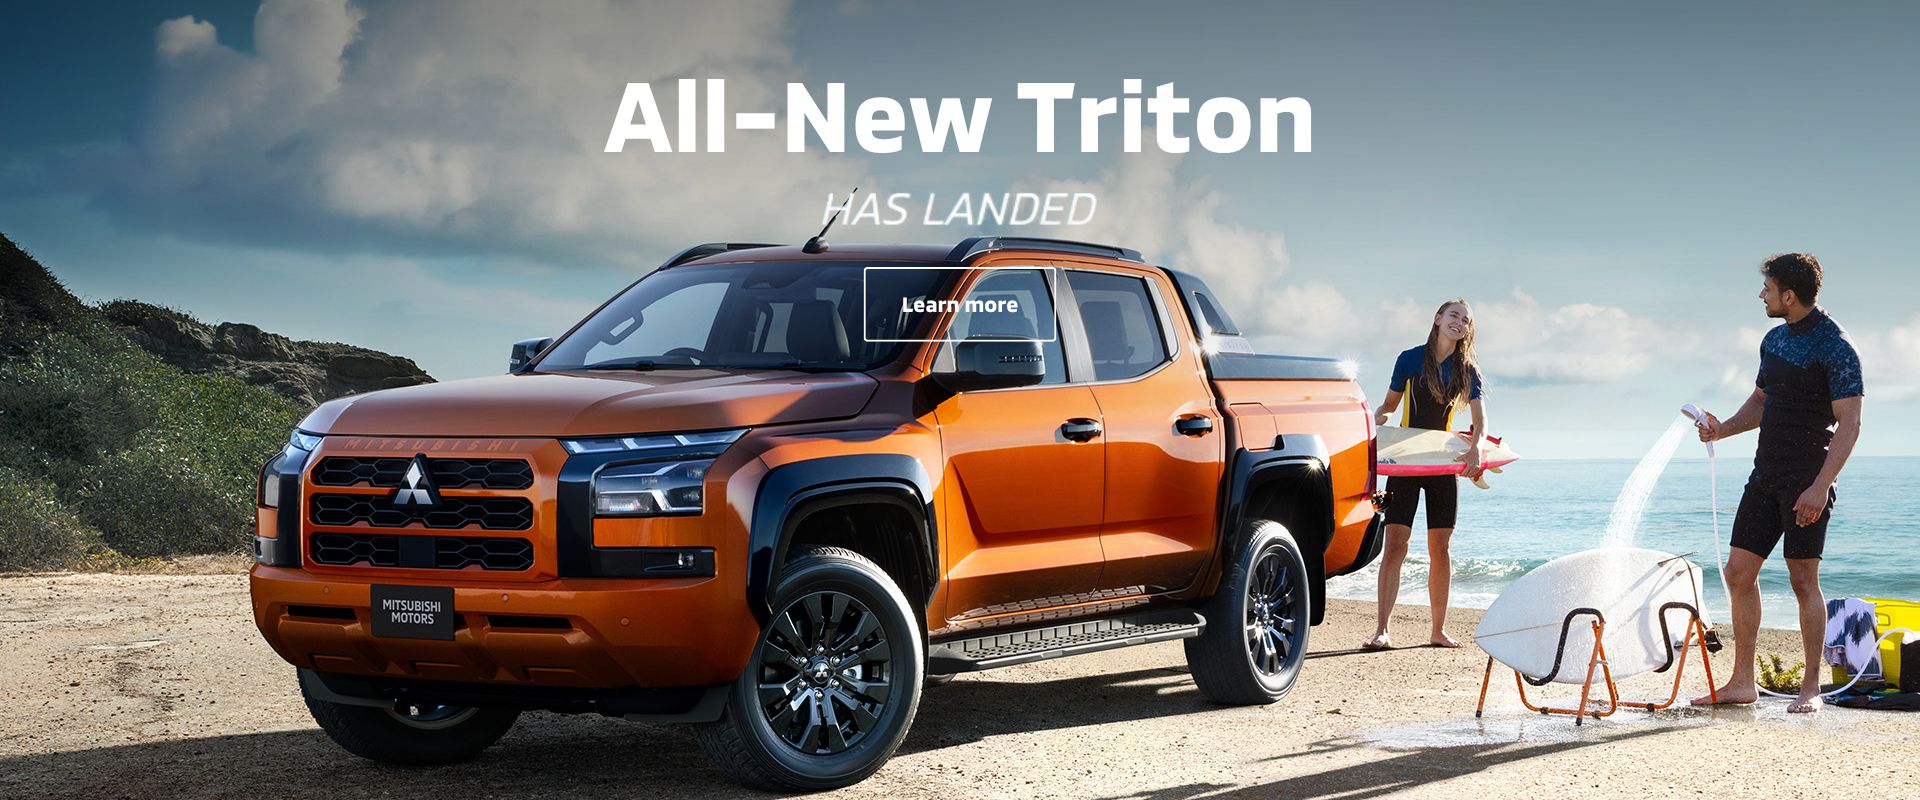 All-New Triton HAS LANDED